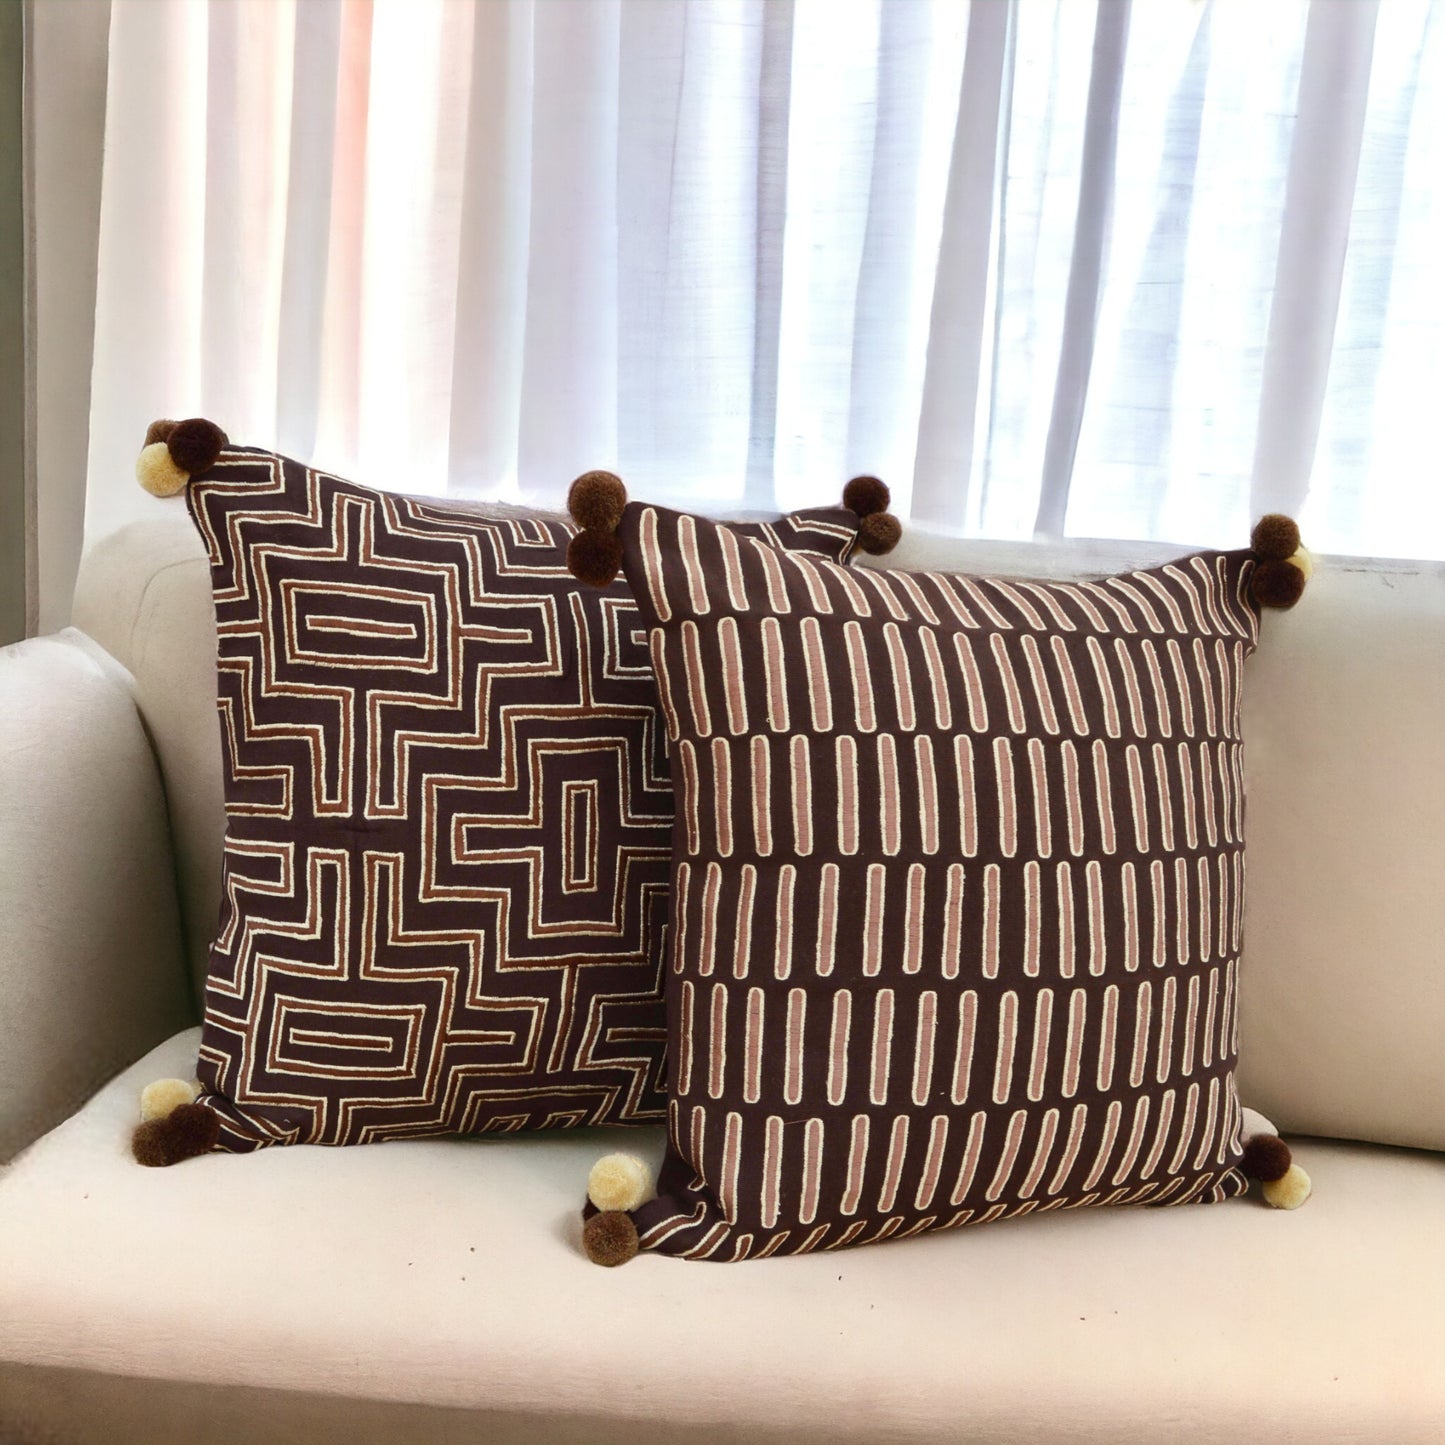 Mola - Brown and beige, pillow cover, embroidered cushion cover